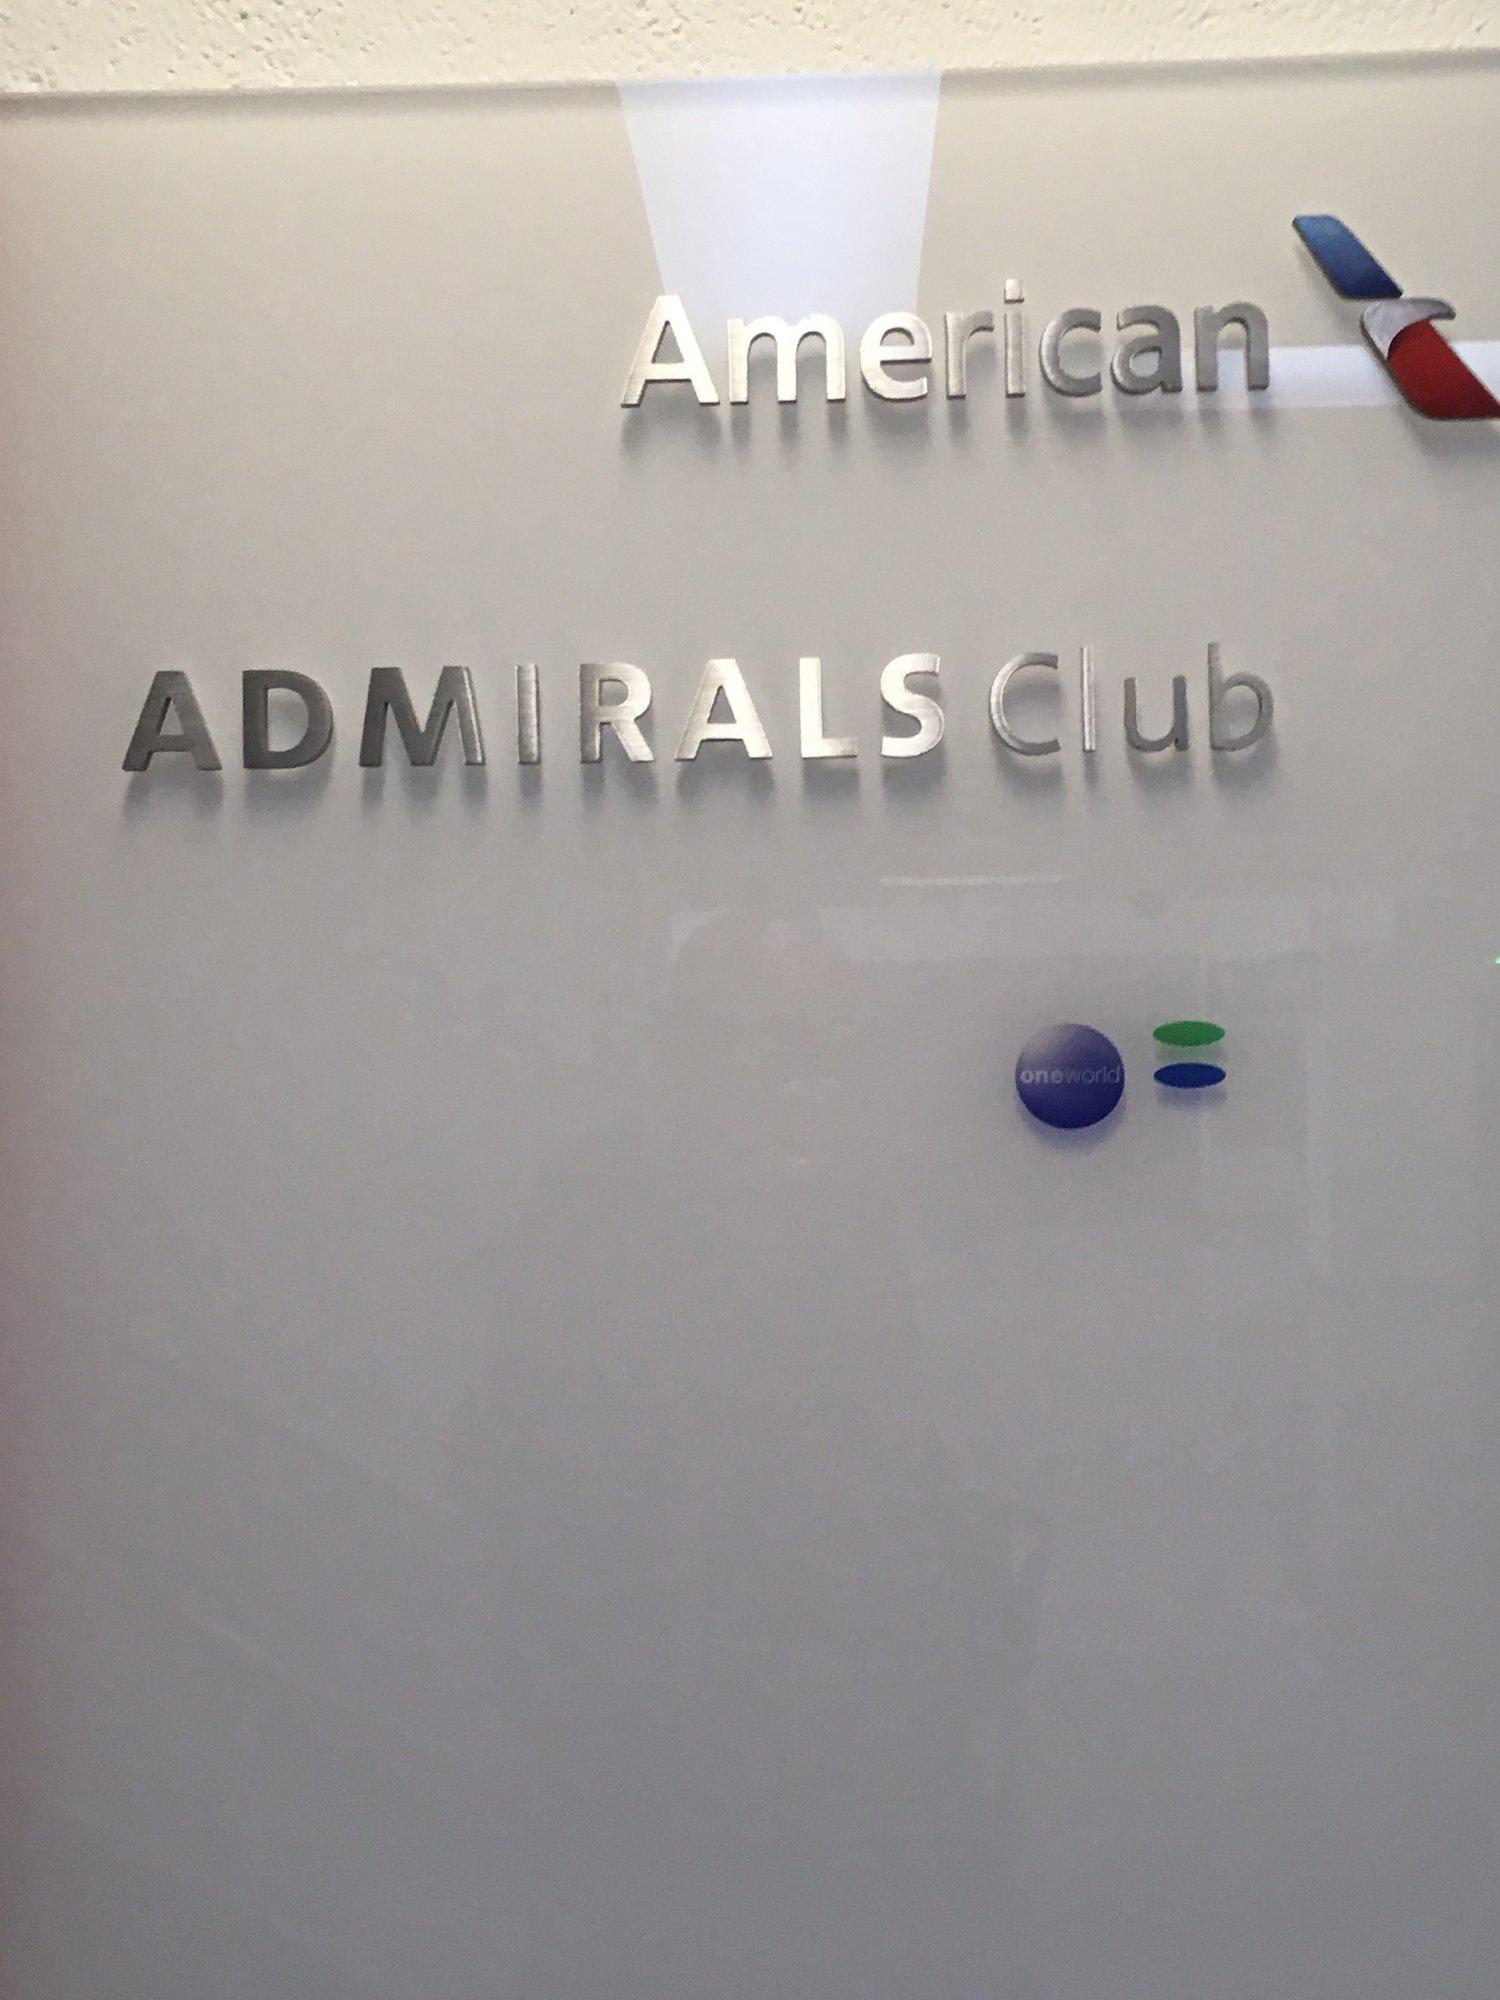 American Airlines Admirals Club image 8 of 32